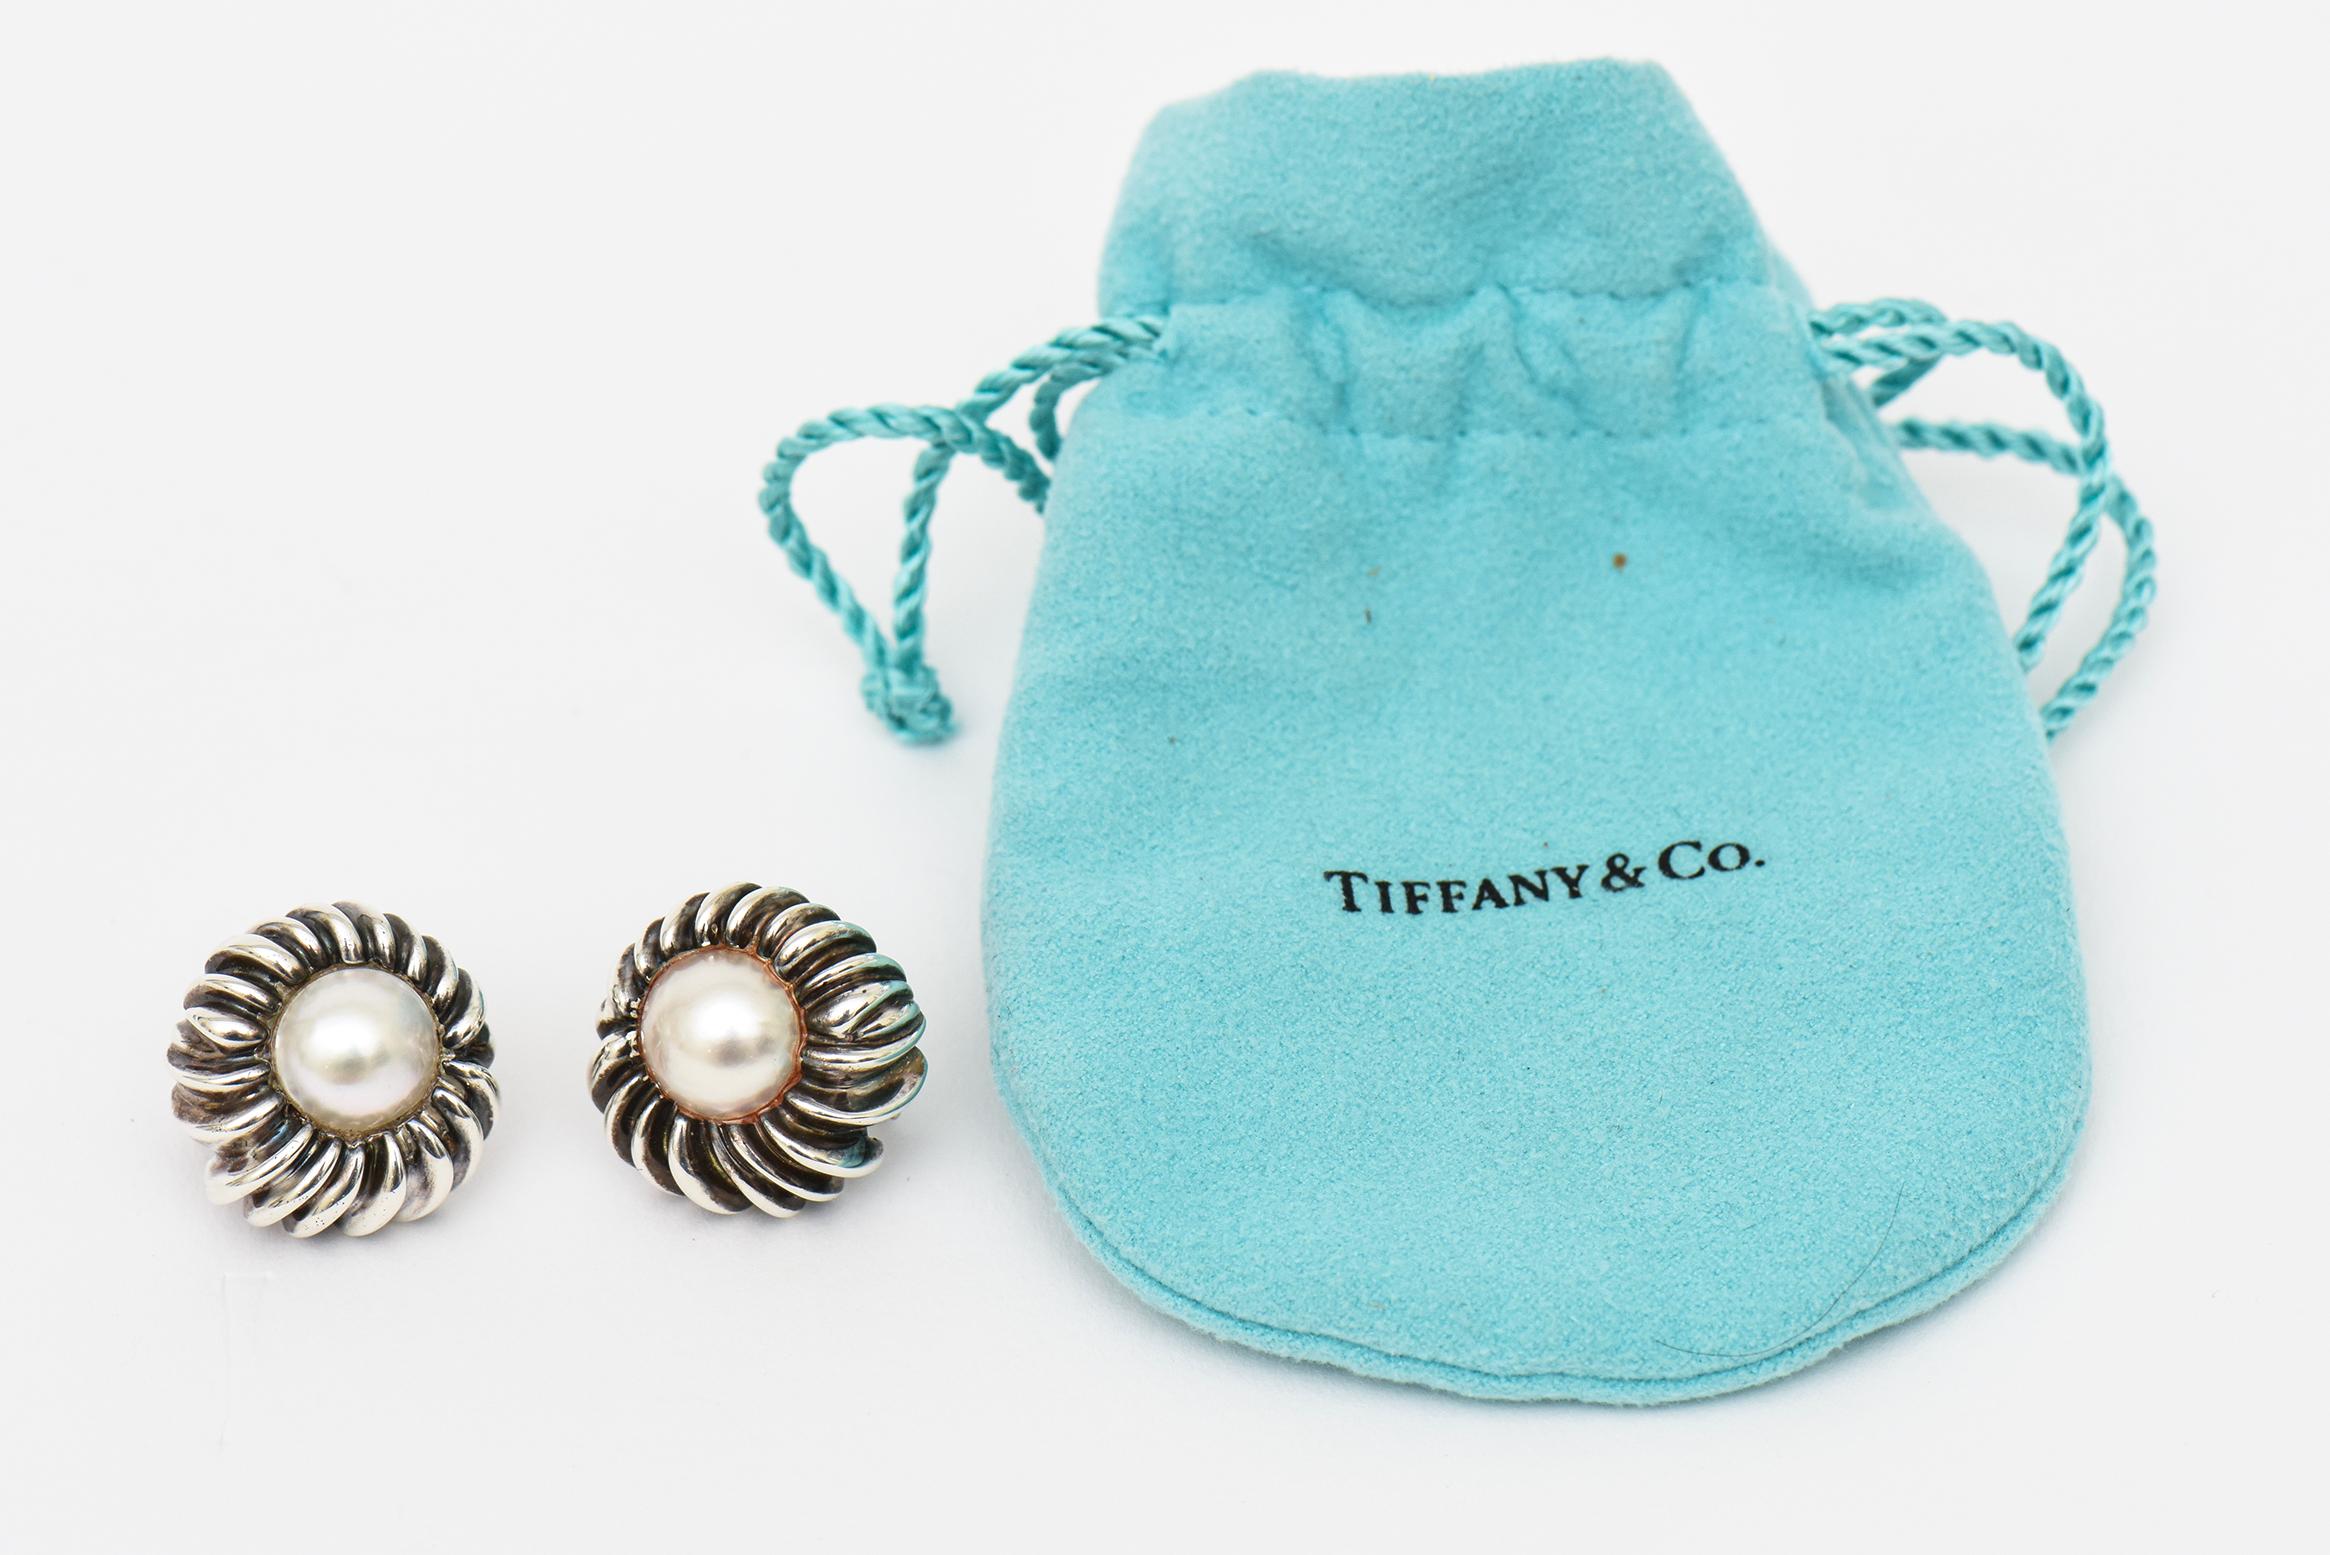 Vintage Tiffany and Co. Sterling Silver and Mabe Pearl Lever Back Earrings In Good Condition For Sale In North Miami, FL